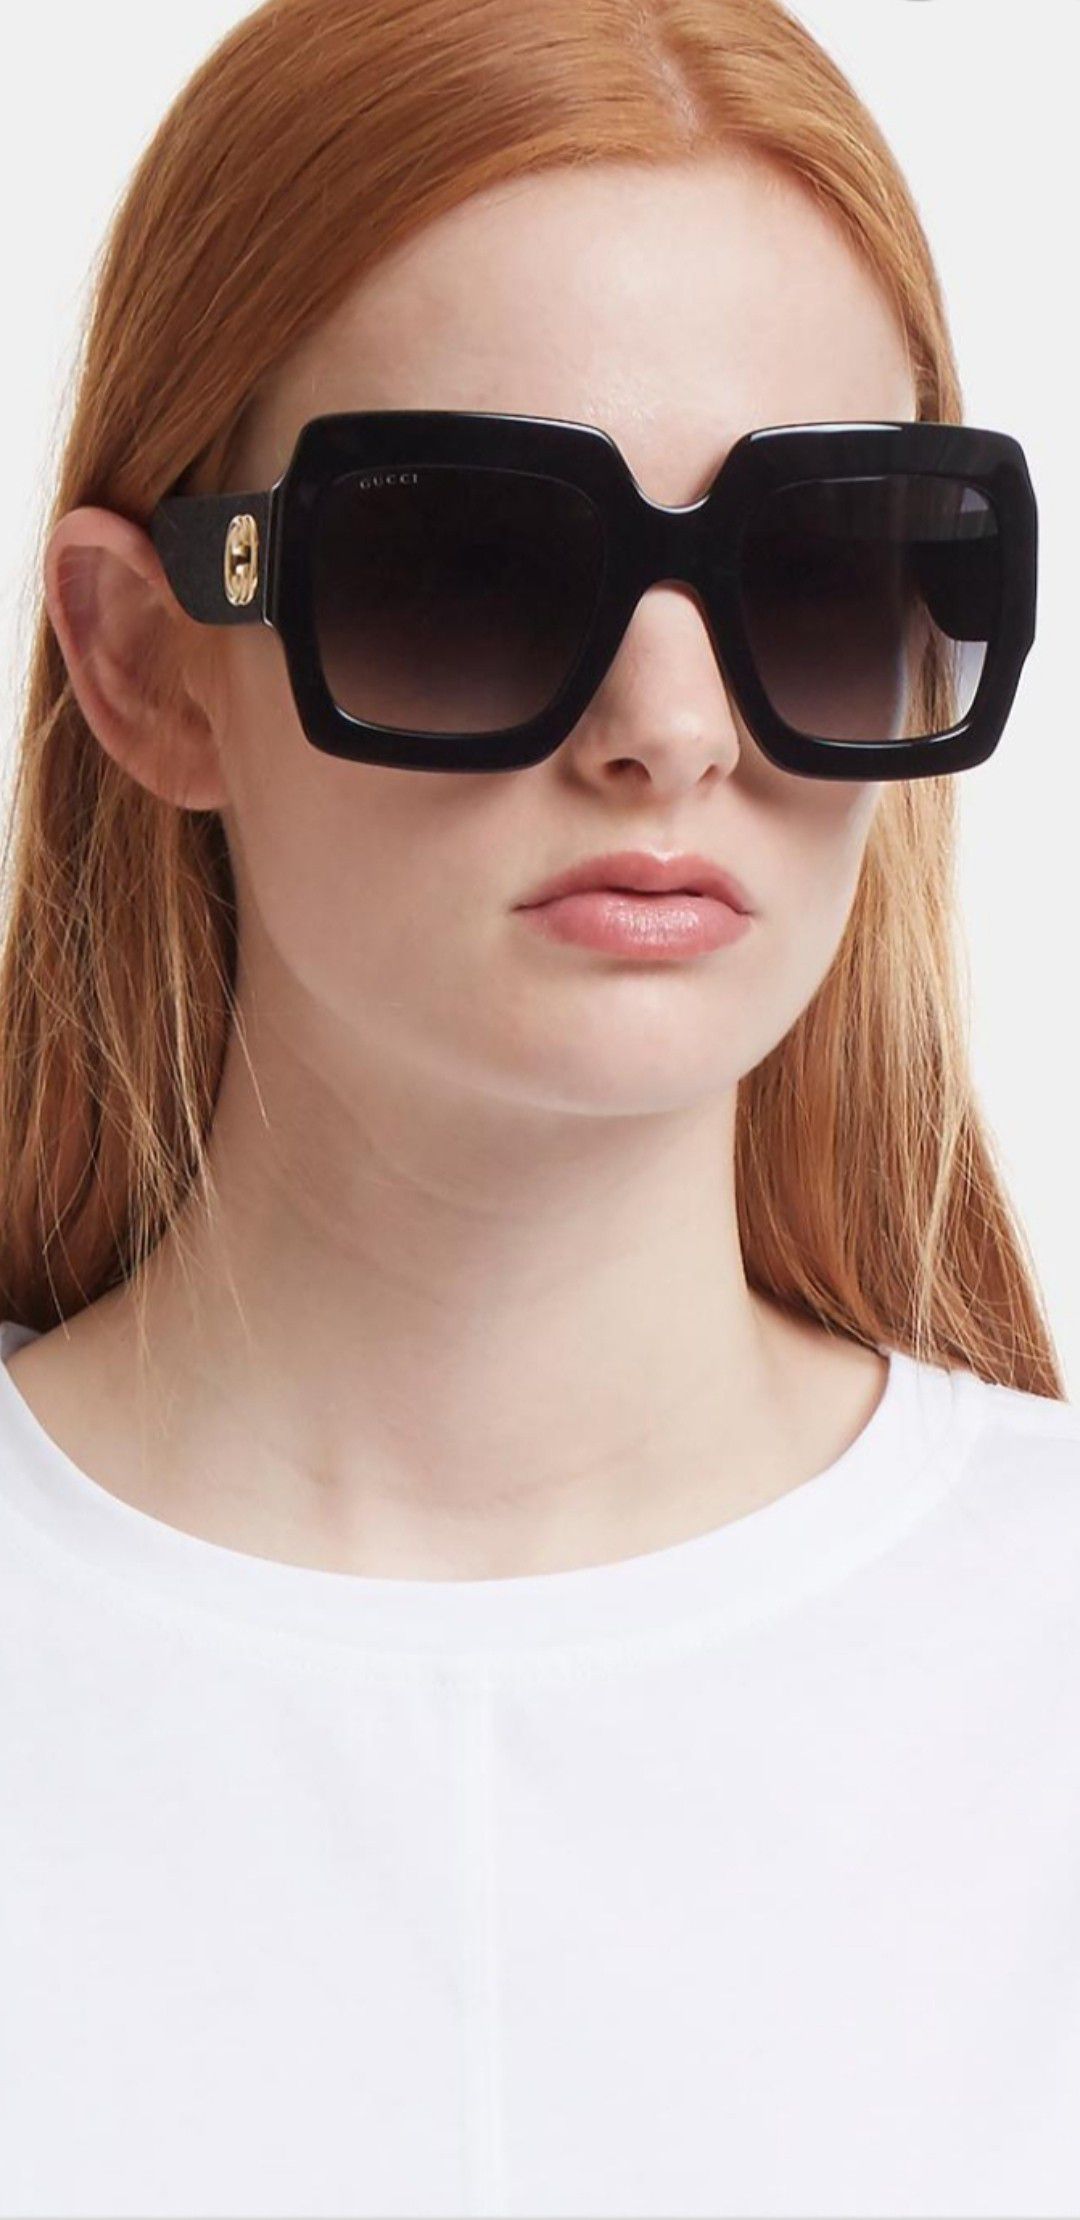 BLACK SLEEK DESIGNER SUNGLASSES - A must have for you sunglasses collection!